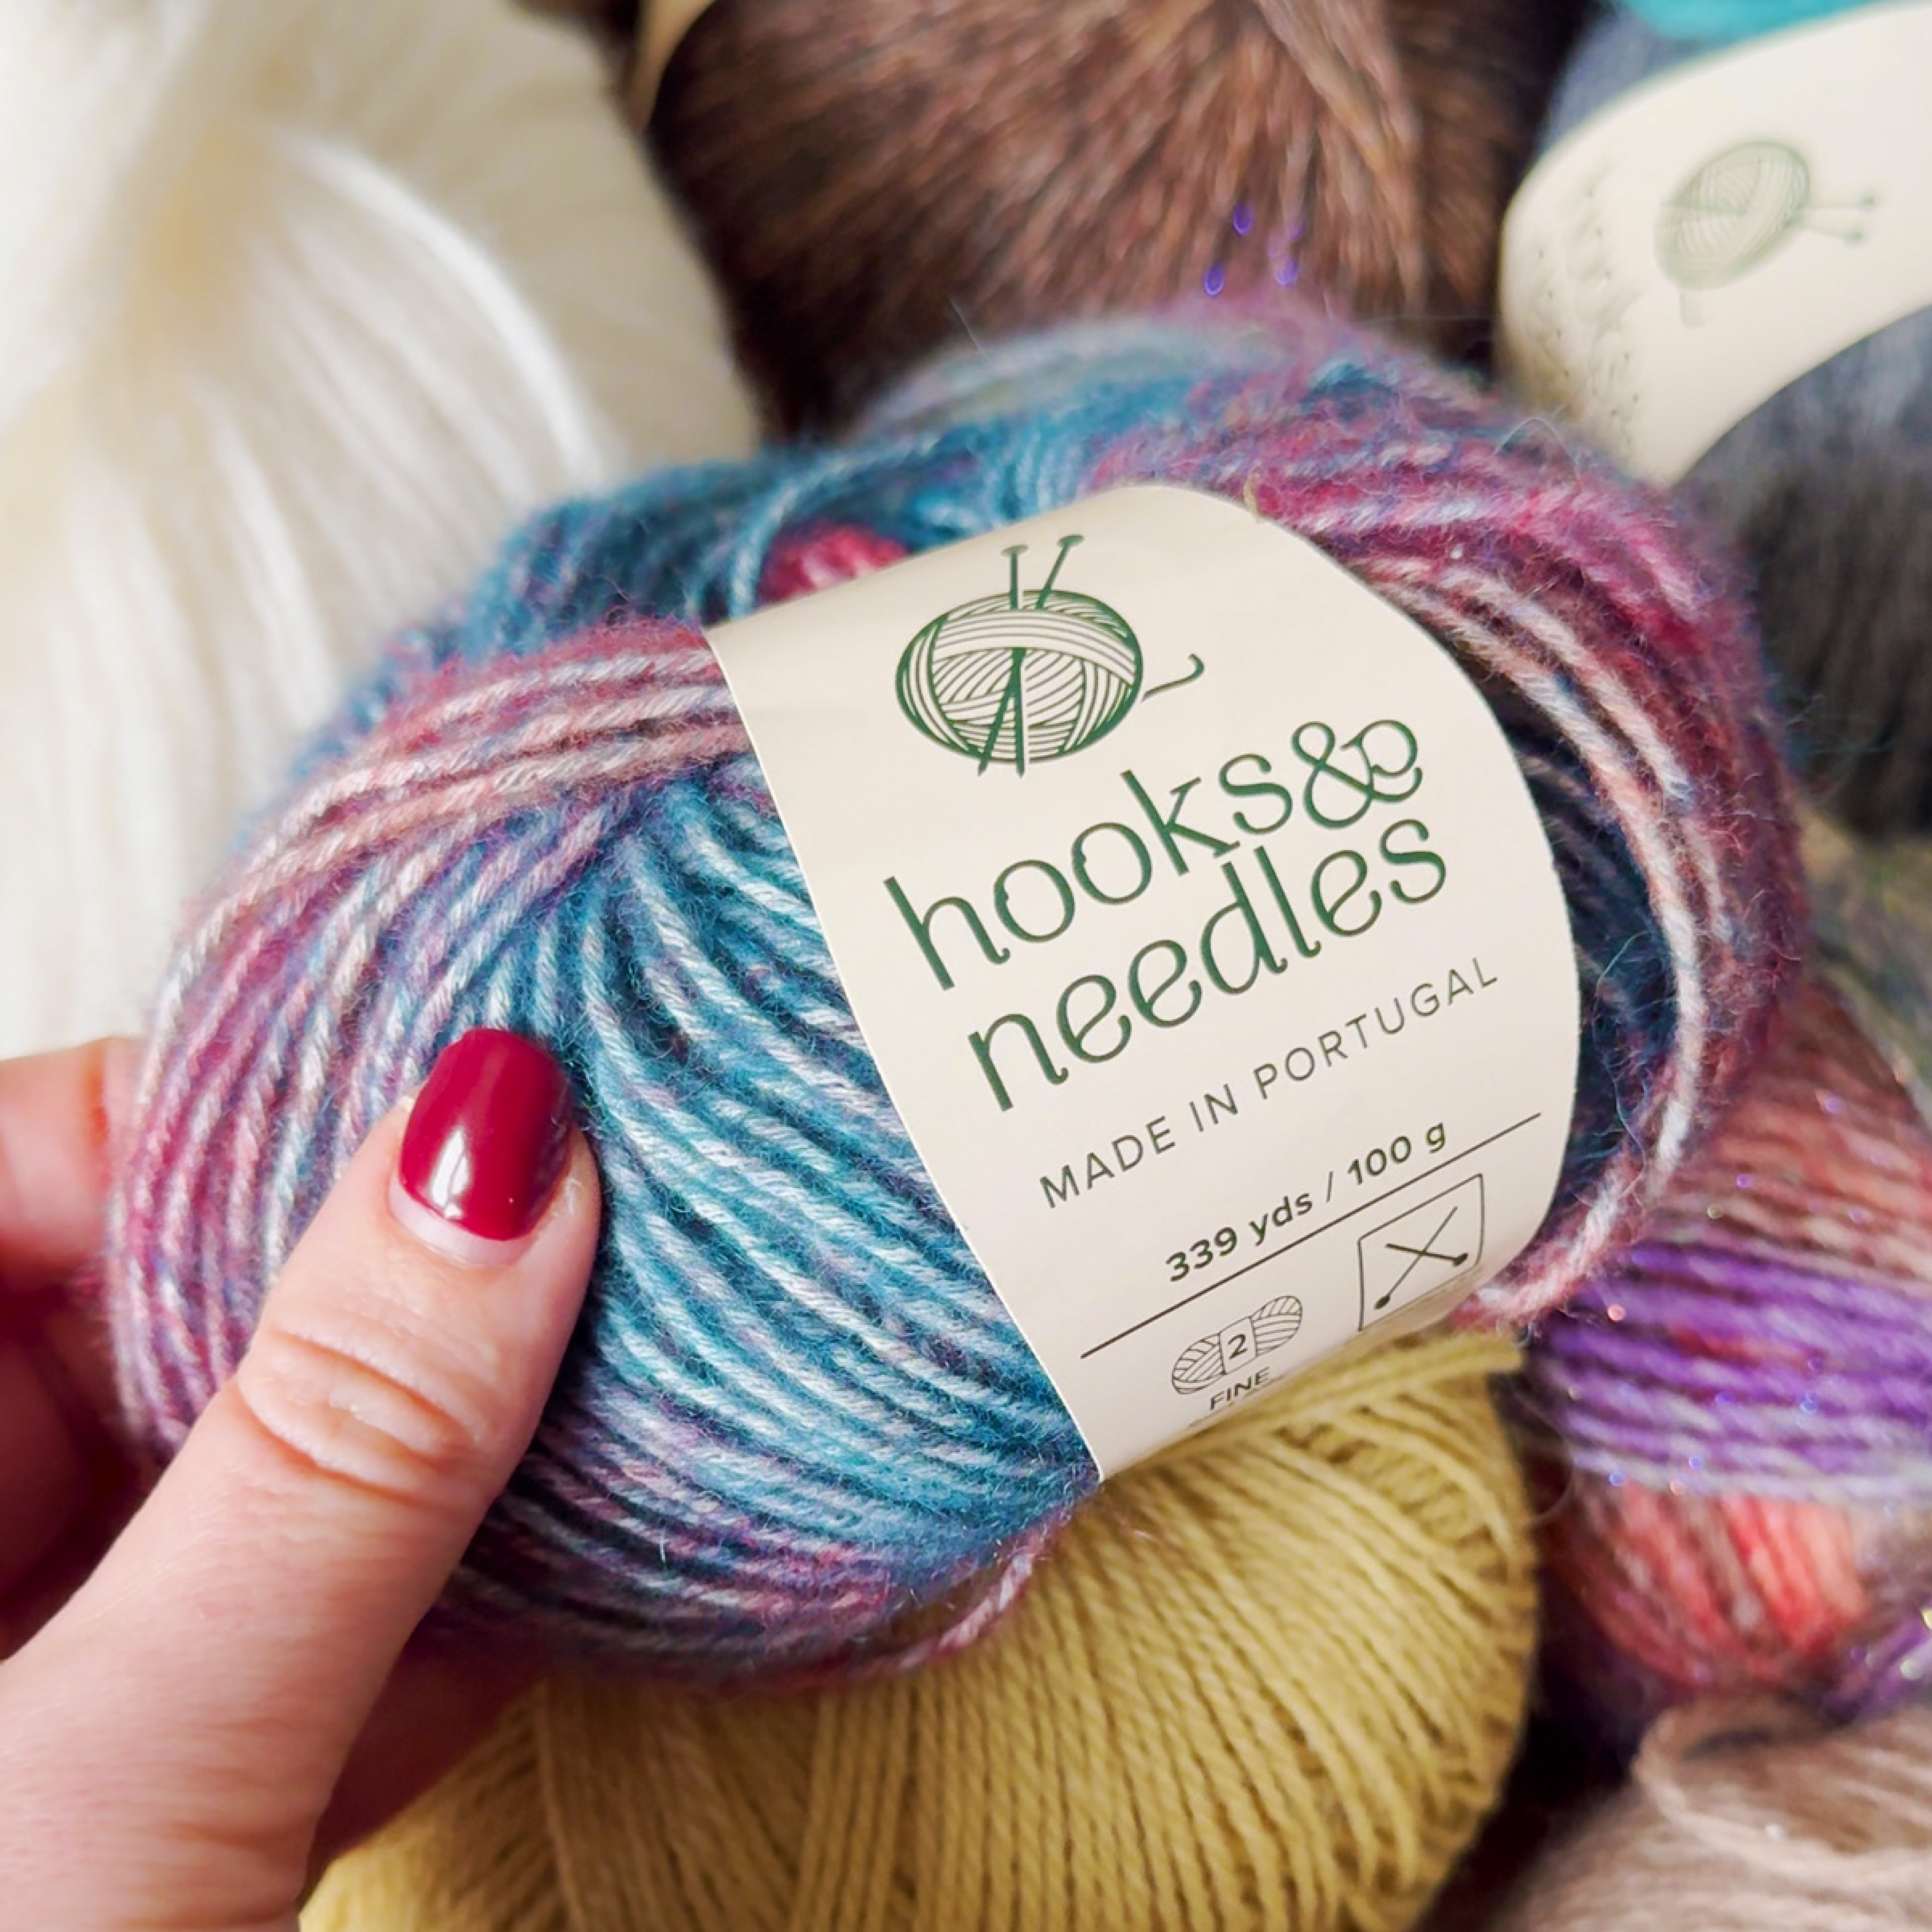 A person holding a skein of multicolored yarn with a label reading "12-Month-Prepaid Hooks & Needles Subscription Box #20 made in Portugal.